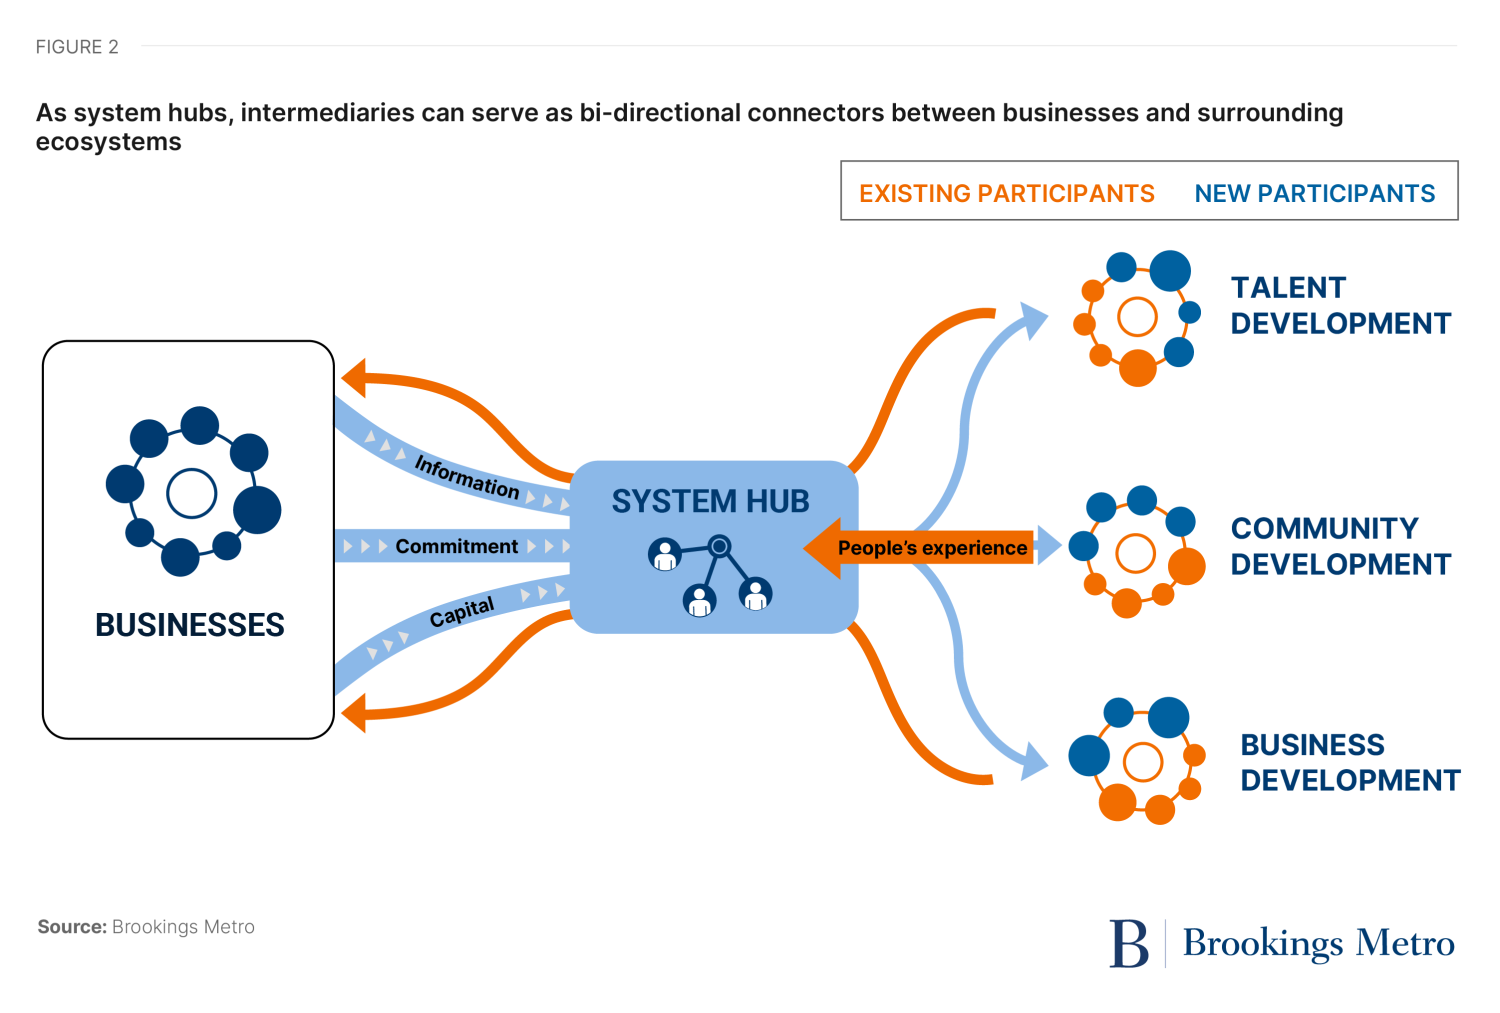 Figure 2: As system hubs, intermediaries can serve as bidirectional connectors between businesses and surrounding ecosystems